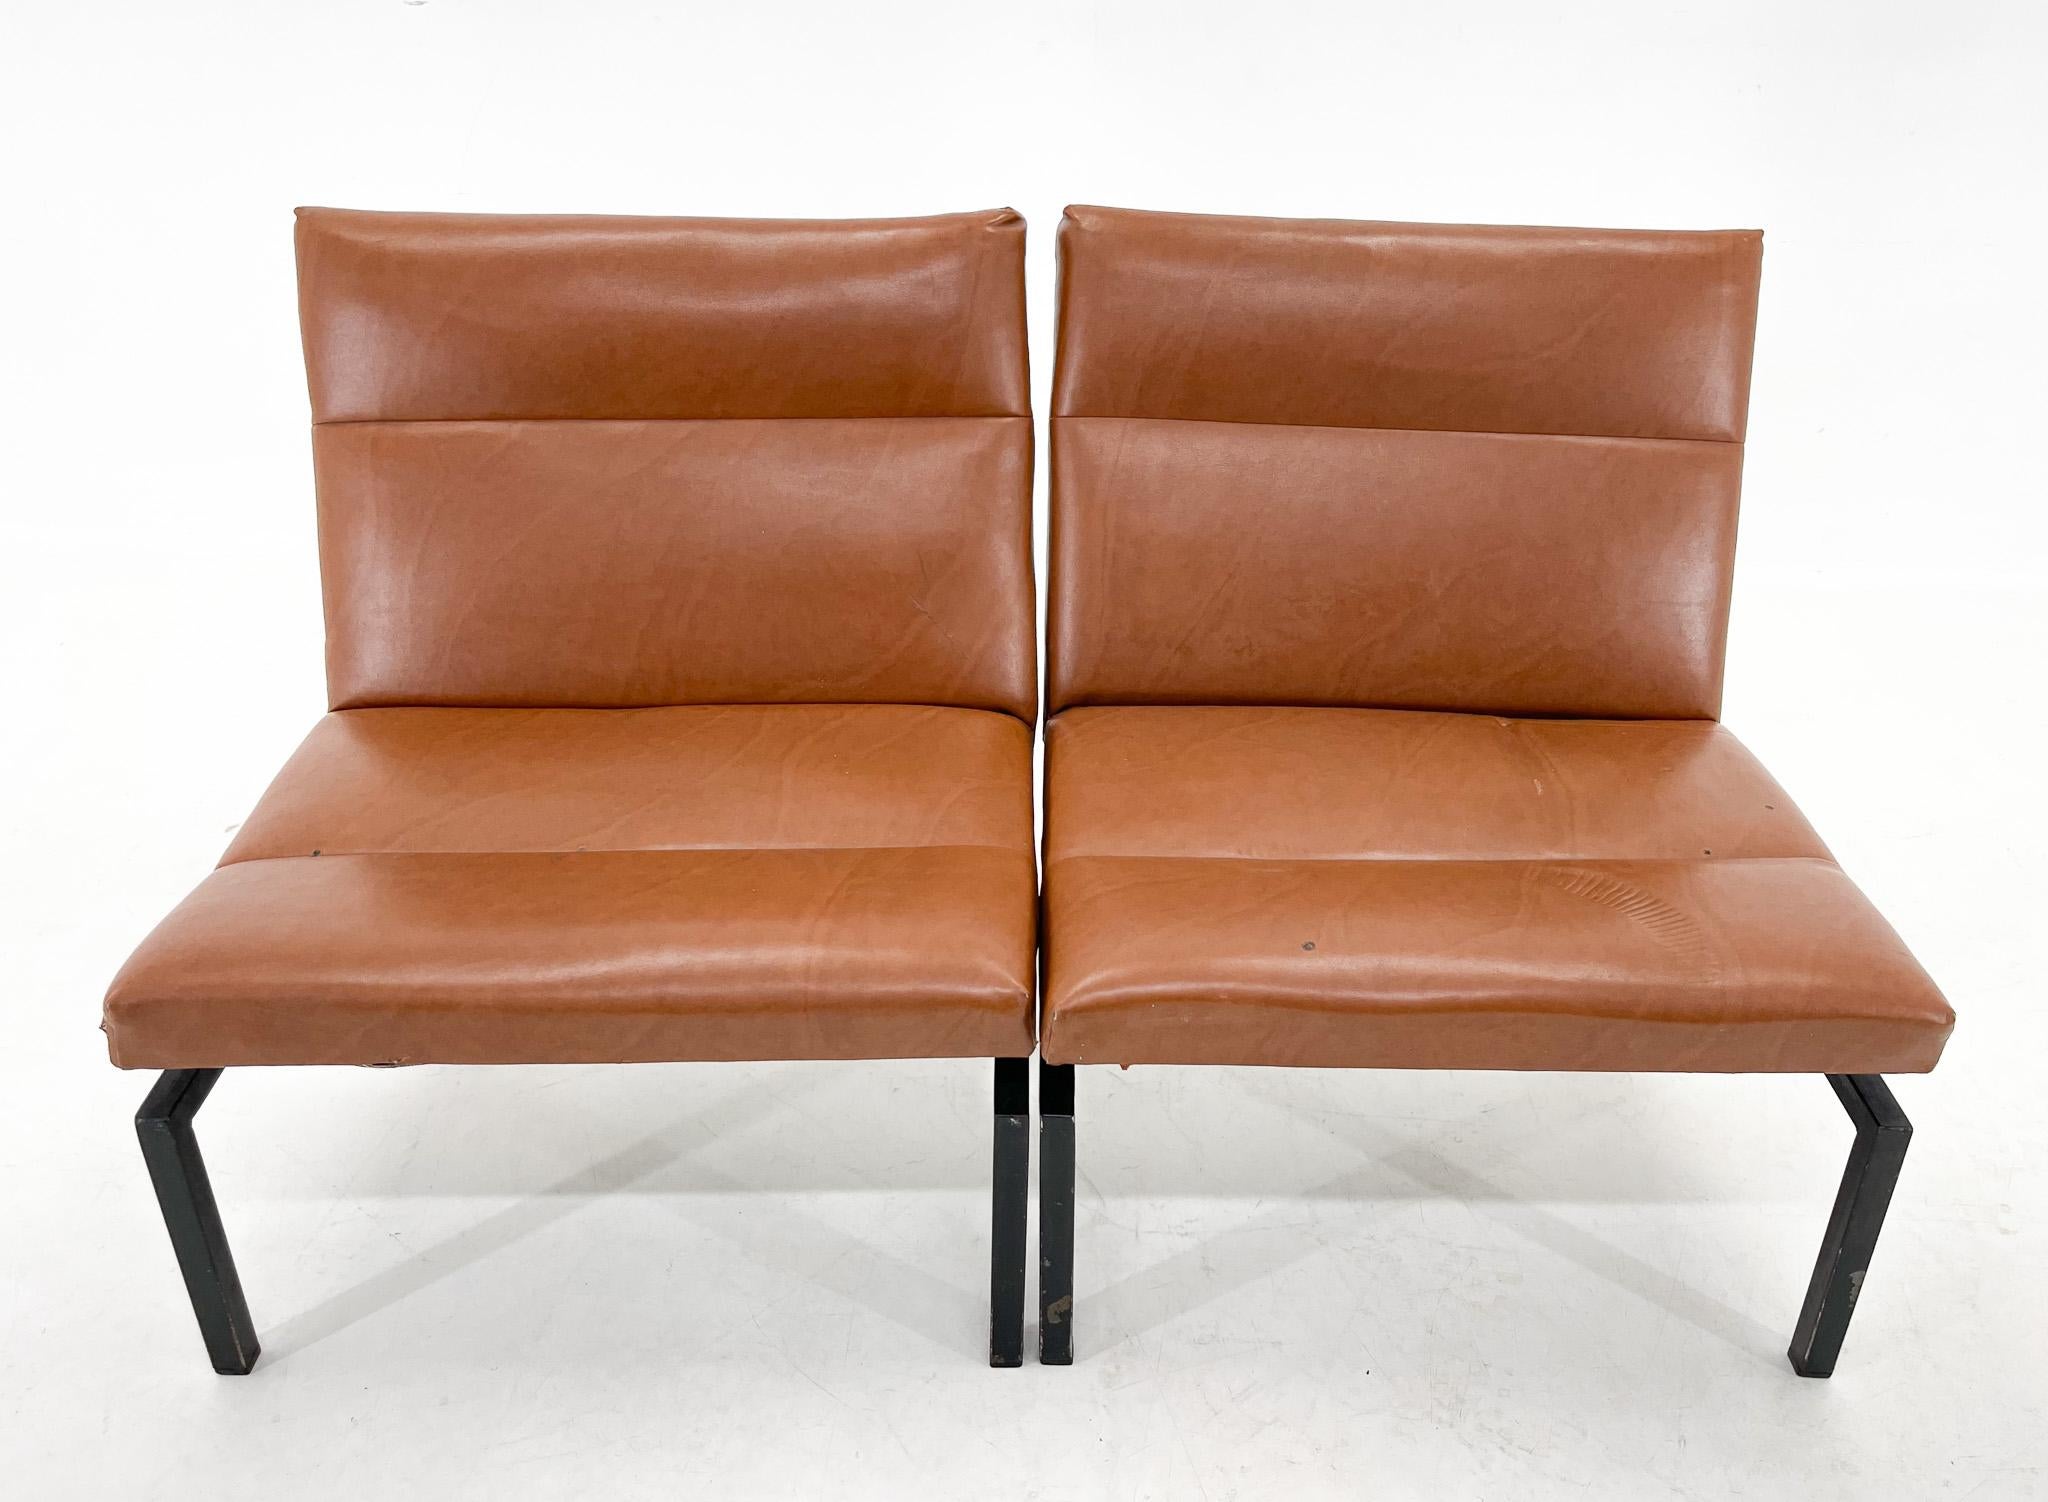 20th Century Midcentury Faux Leather & Metal Lounge Chairs, 2 Pieces Available For Sale